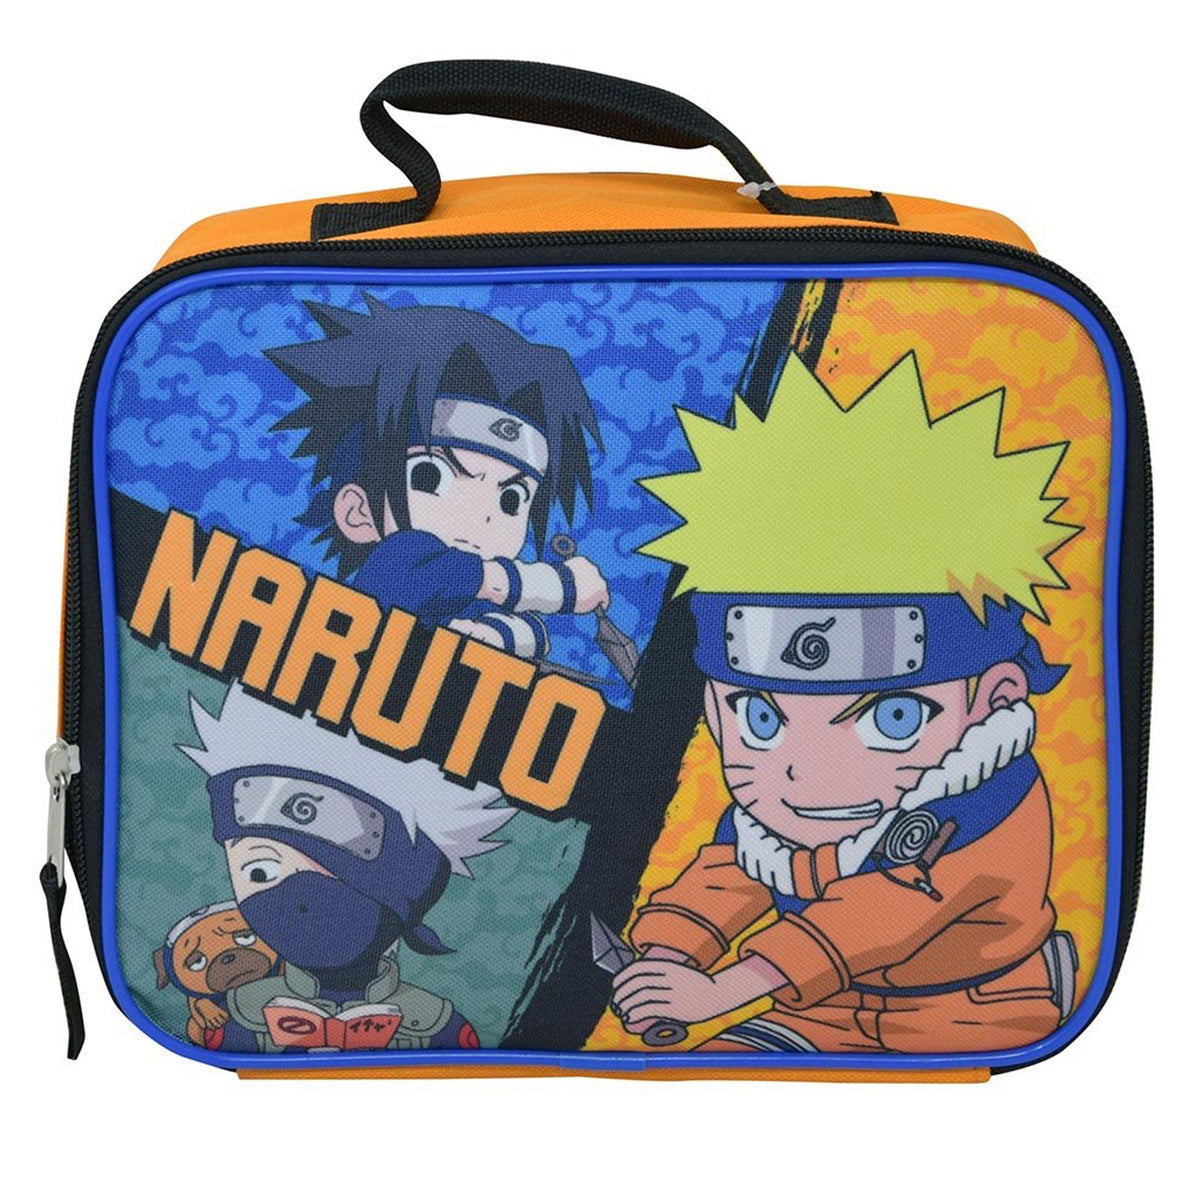 Naruto Insulated Lunch Tote - FINAL SALE